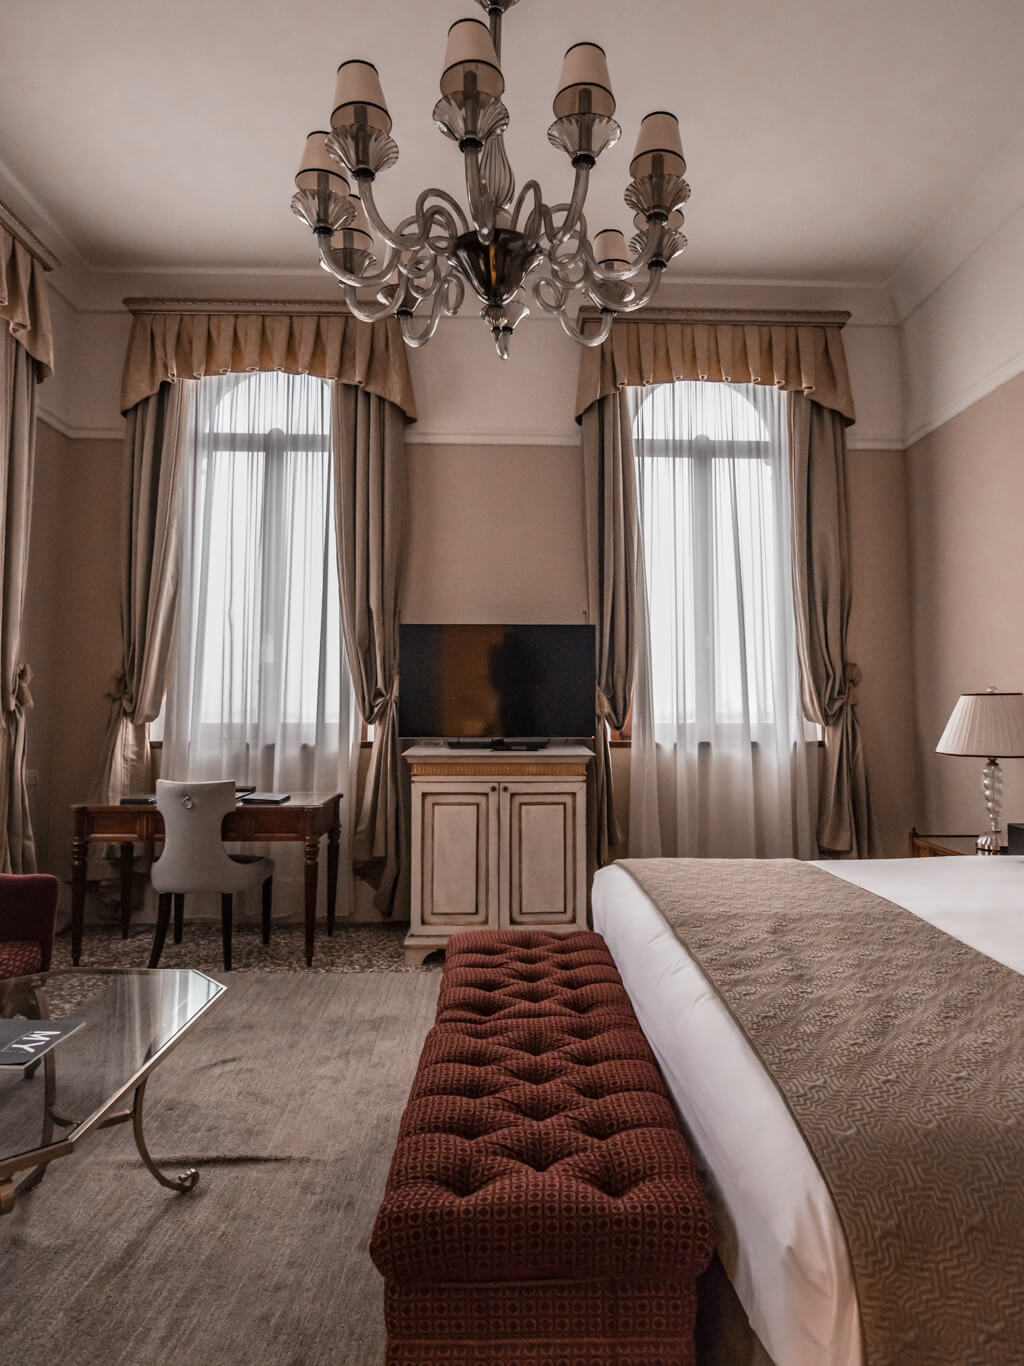 San Clemente Palace Kempinski - Hotel review in Venice